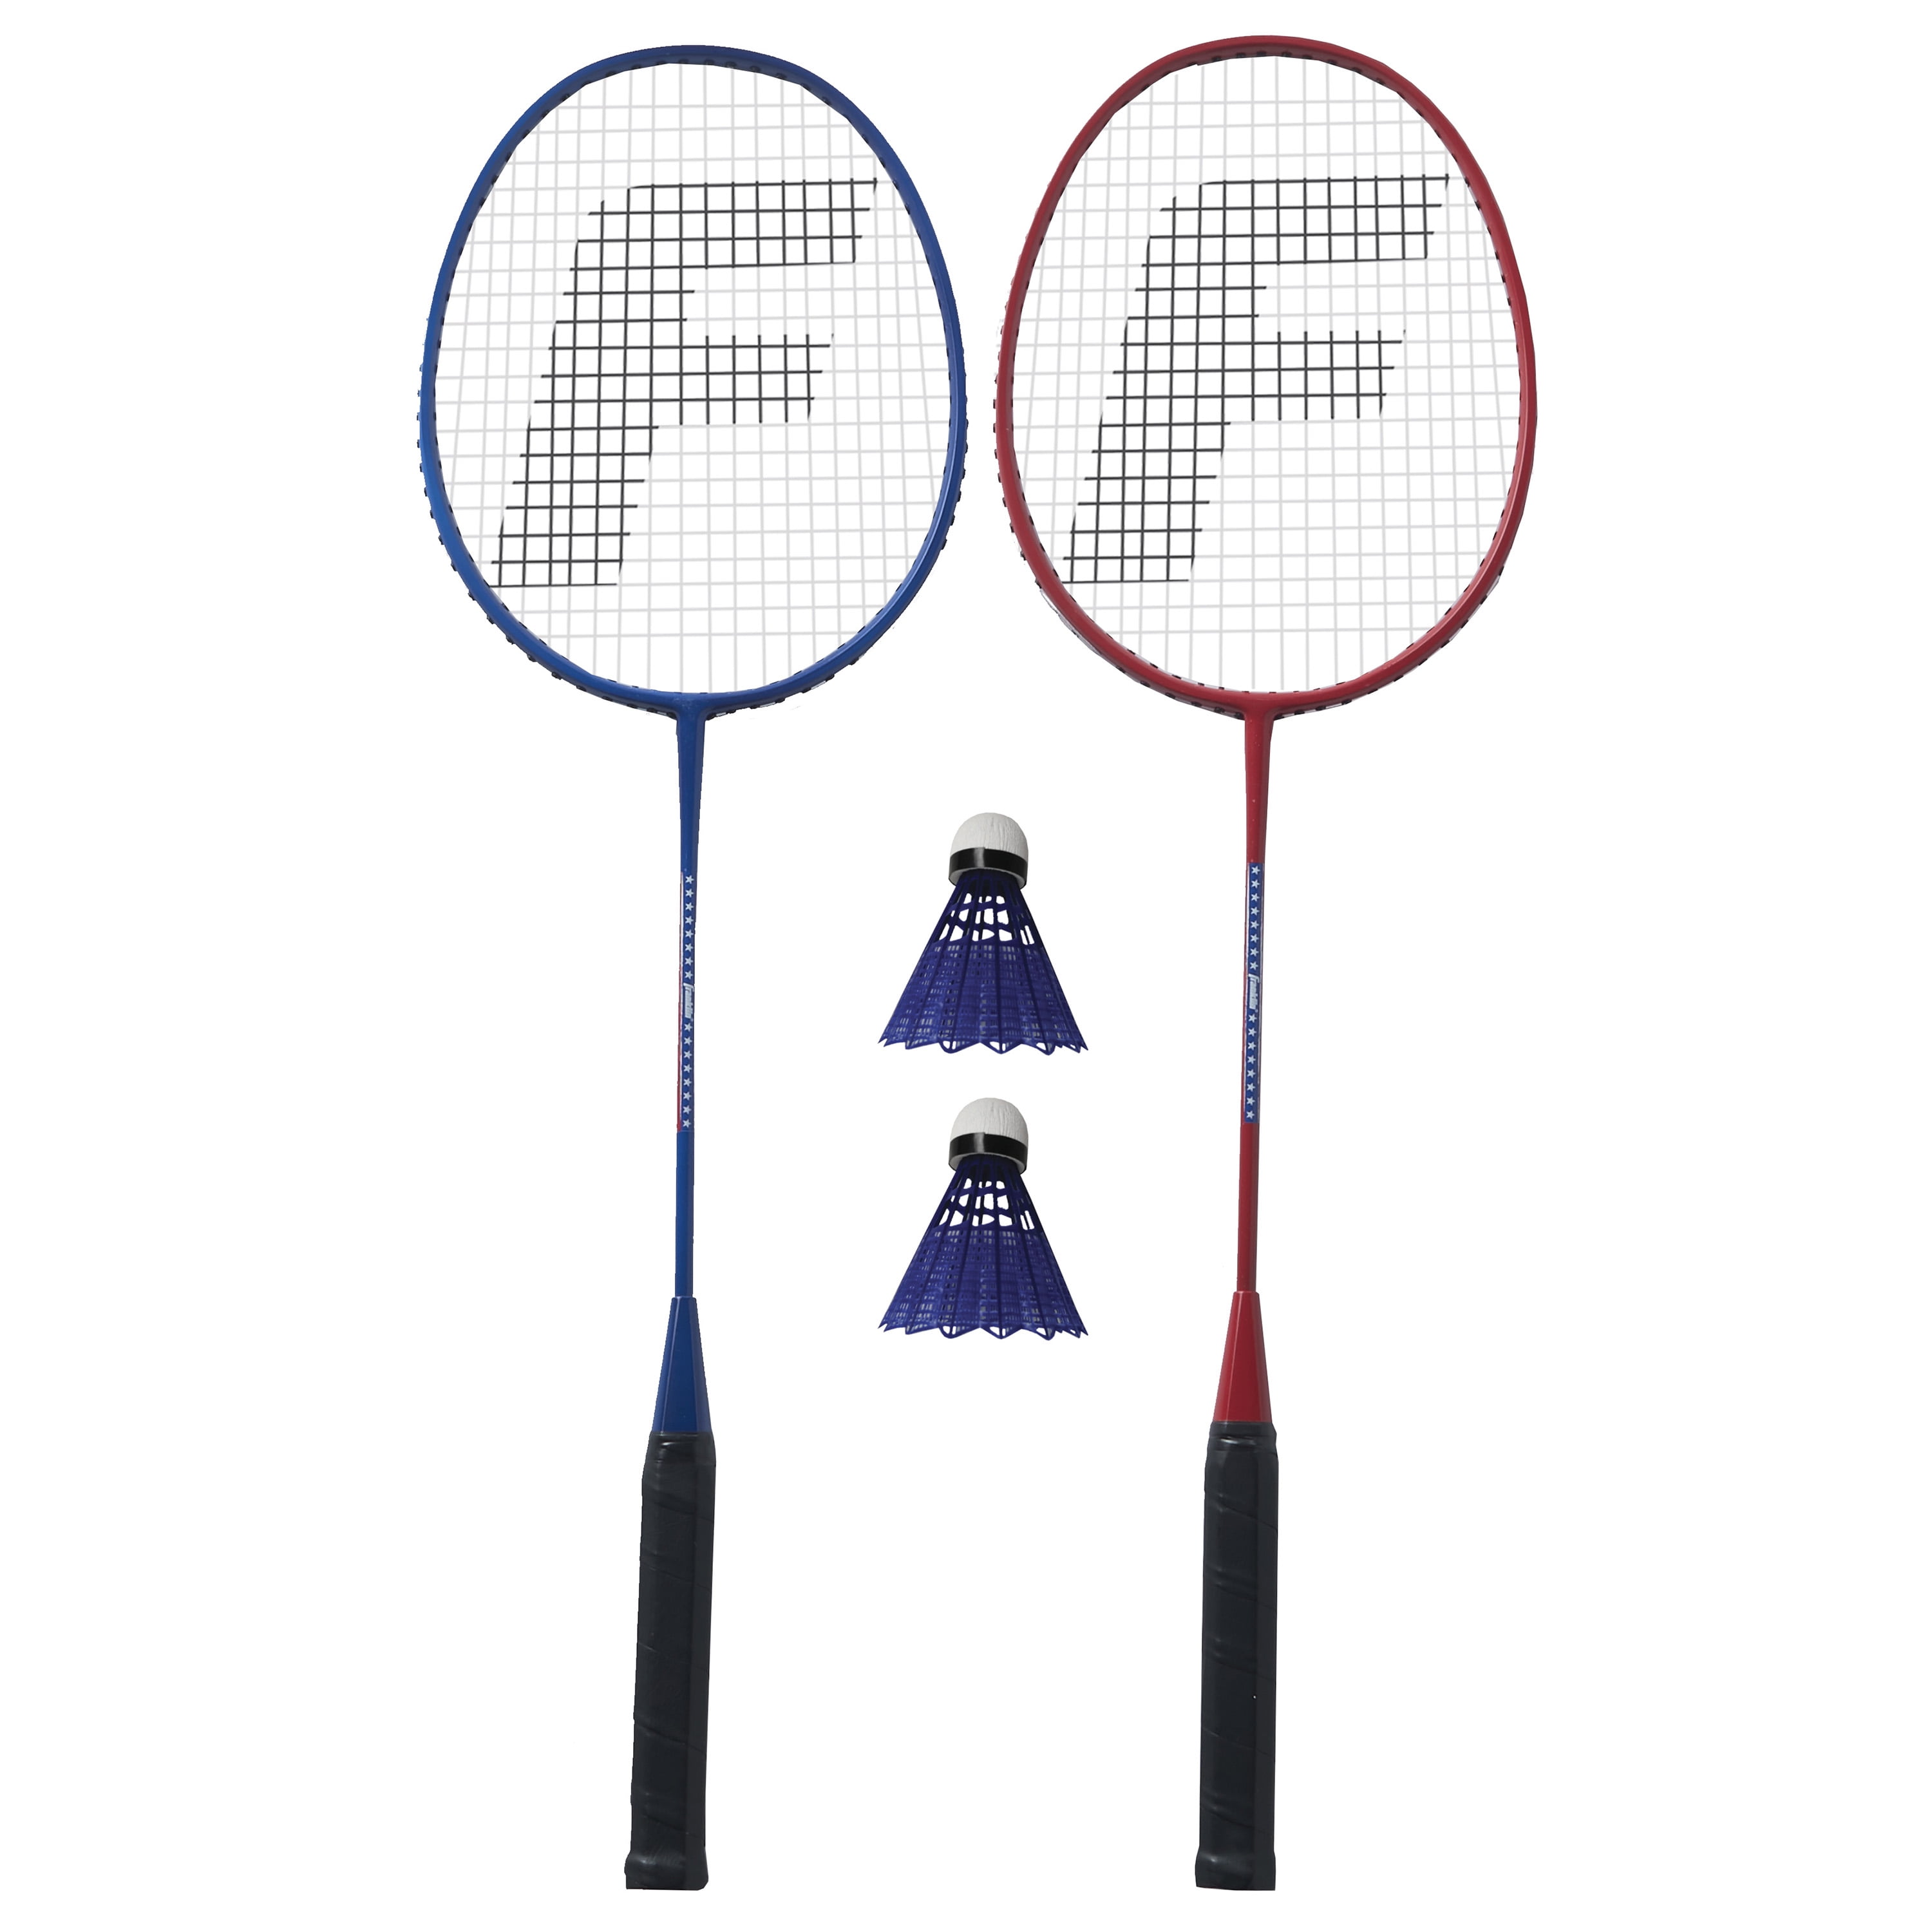 NEW EastPoint Sports 2-Player Badminton Racket Set with Case FREE SHIPPING! 